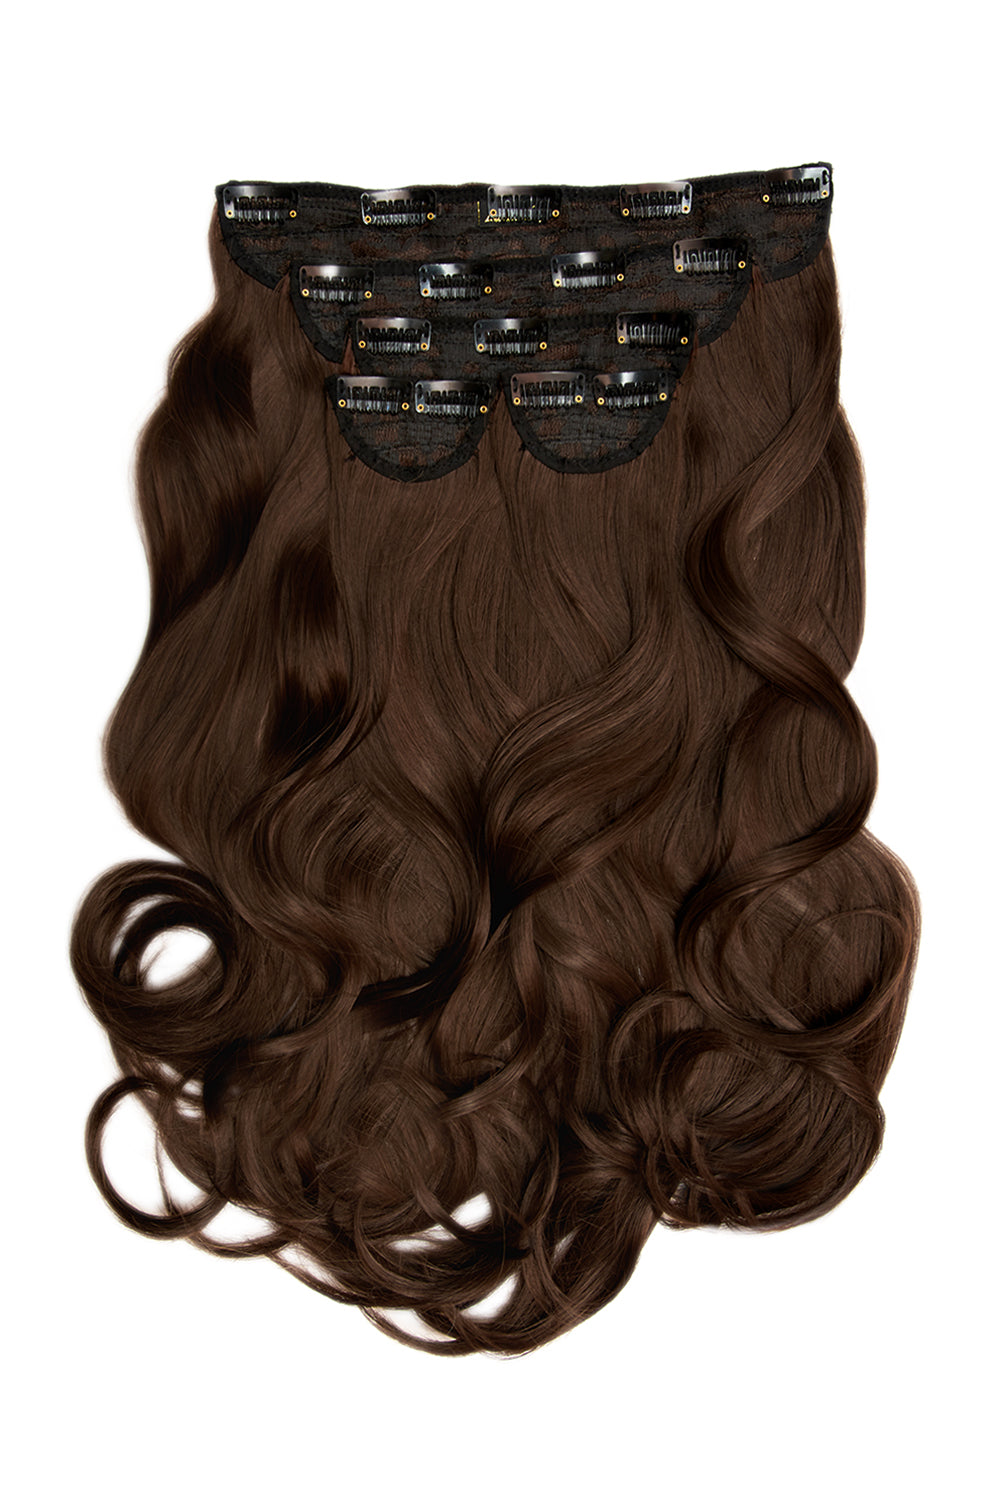 Super Thick 22" 5 Piece Blow Dry Wavy Clip In Hair Extensions - Chocolate Brown